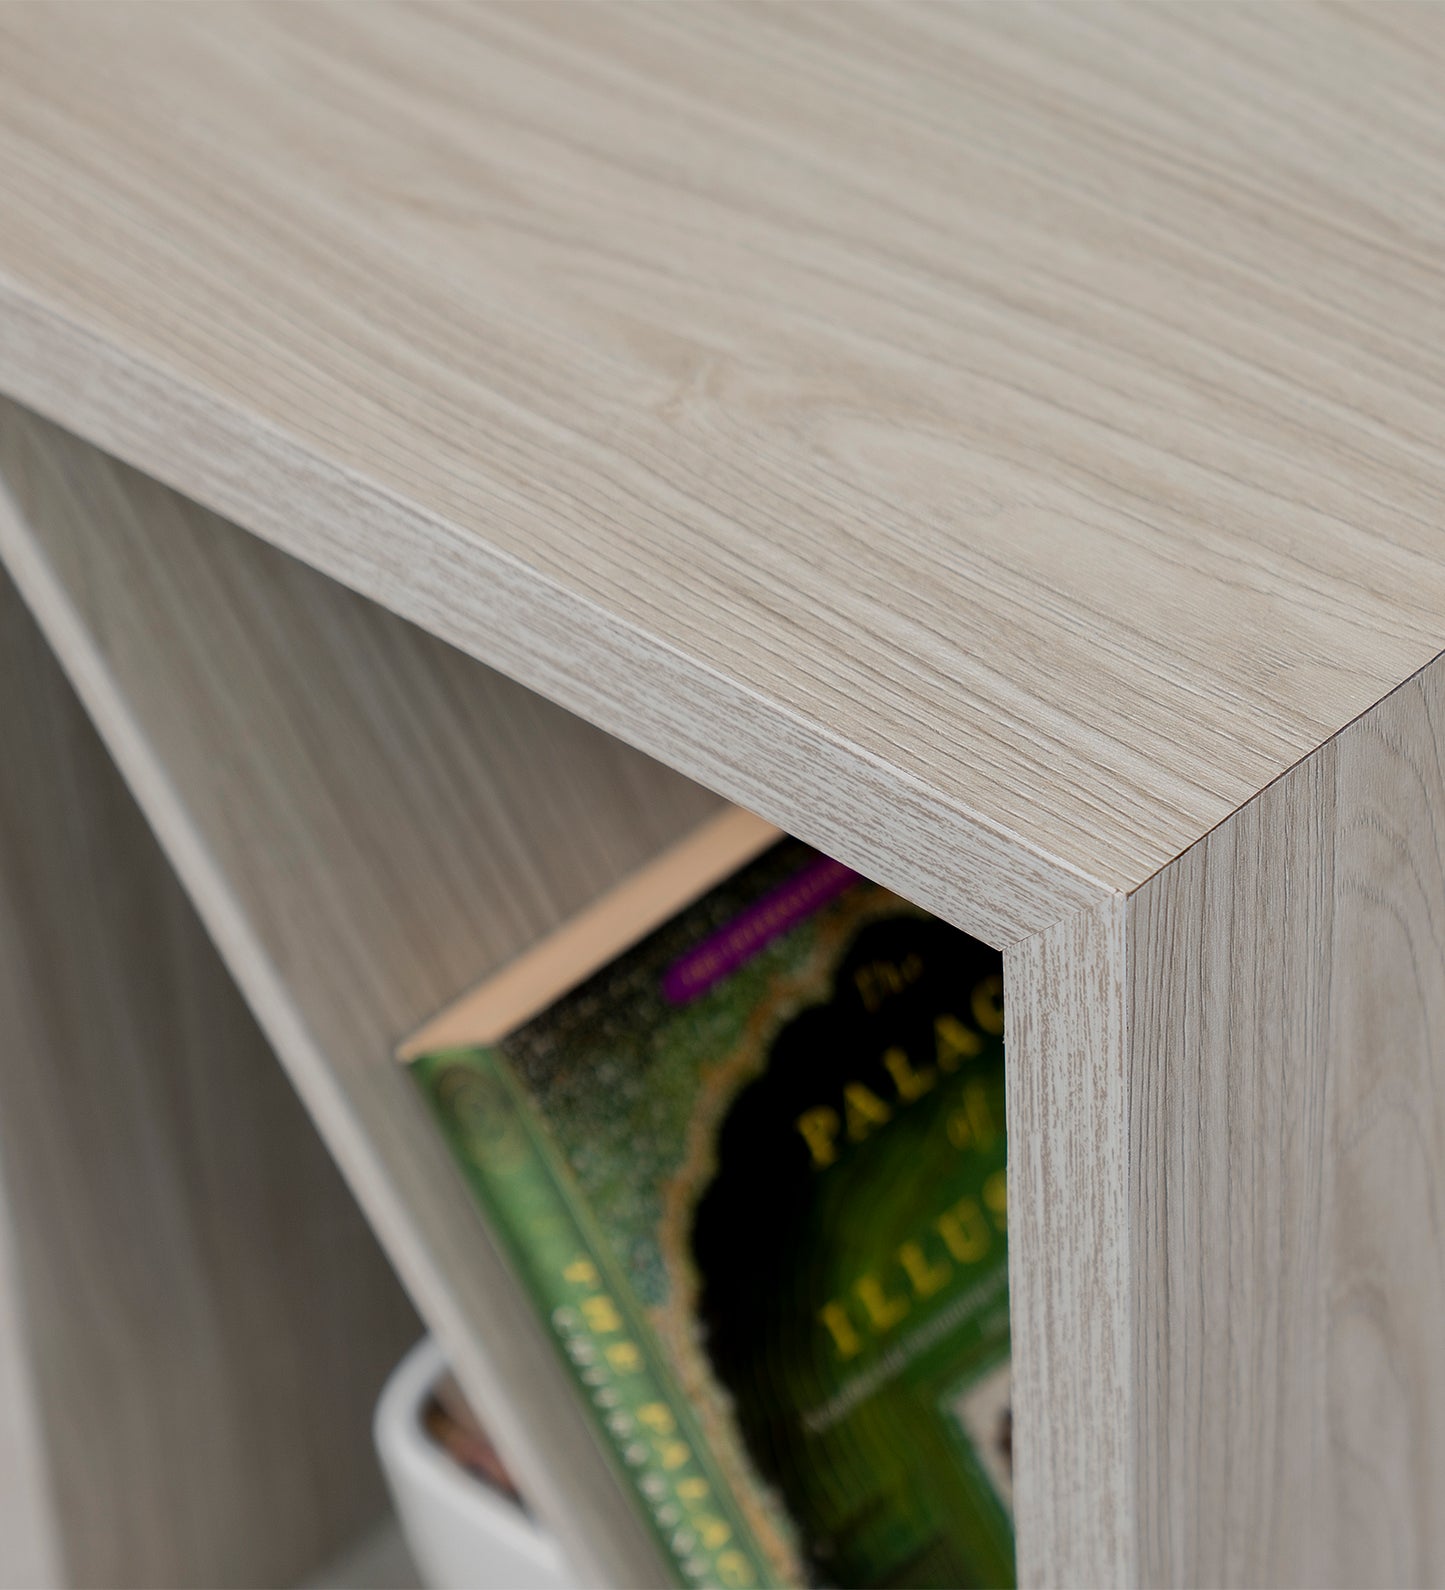 Bevel - Side Table, Small Storage and Decor, End Table, Living and Bedroom Decor, Wooden Table